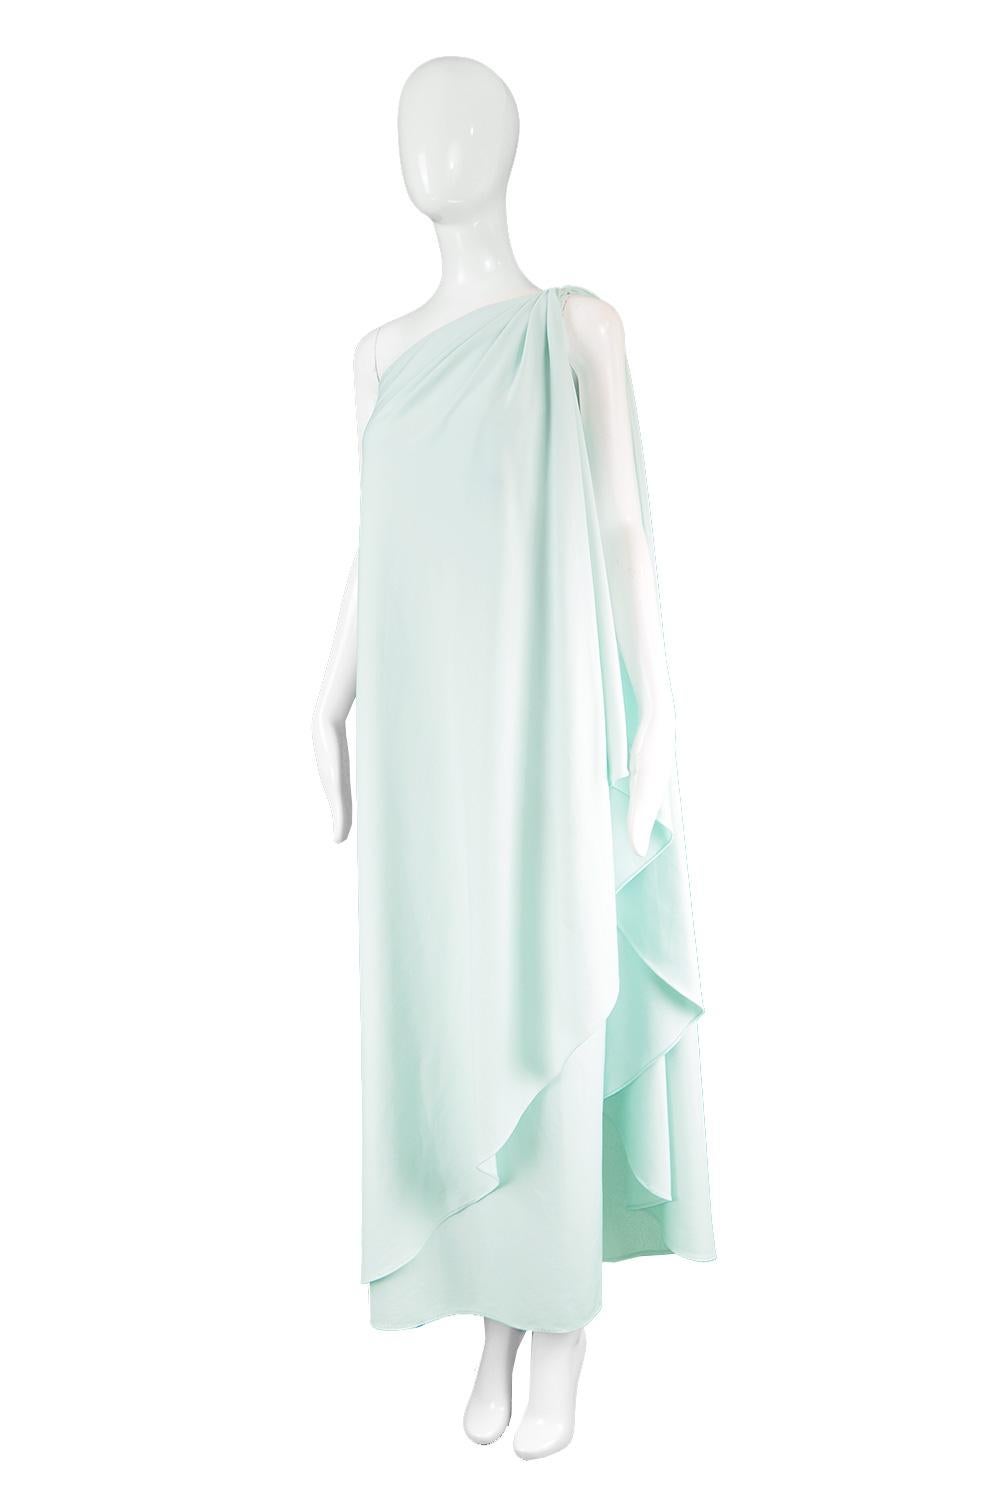 Halston Vintage Mint Green Draped Grecian One Shoulder Jersey Dress, 1970s im Zustand „Gut“ in Doncaster, South Yorkshire